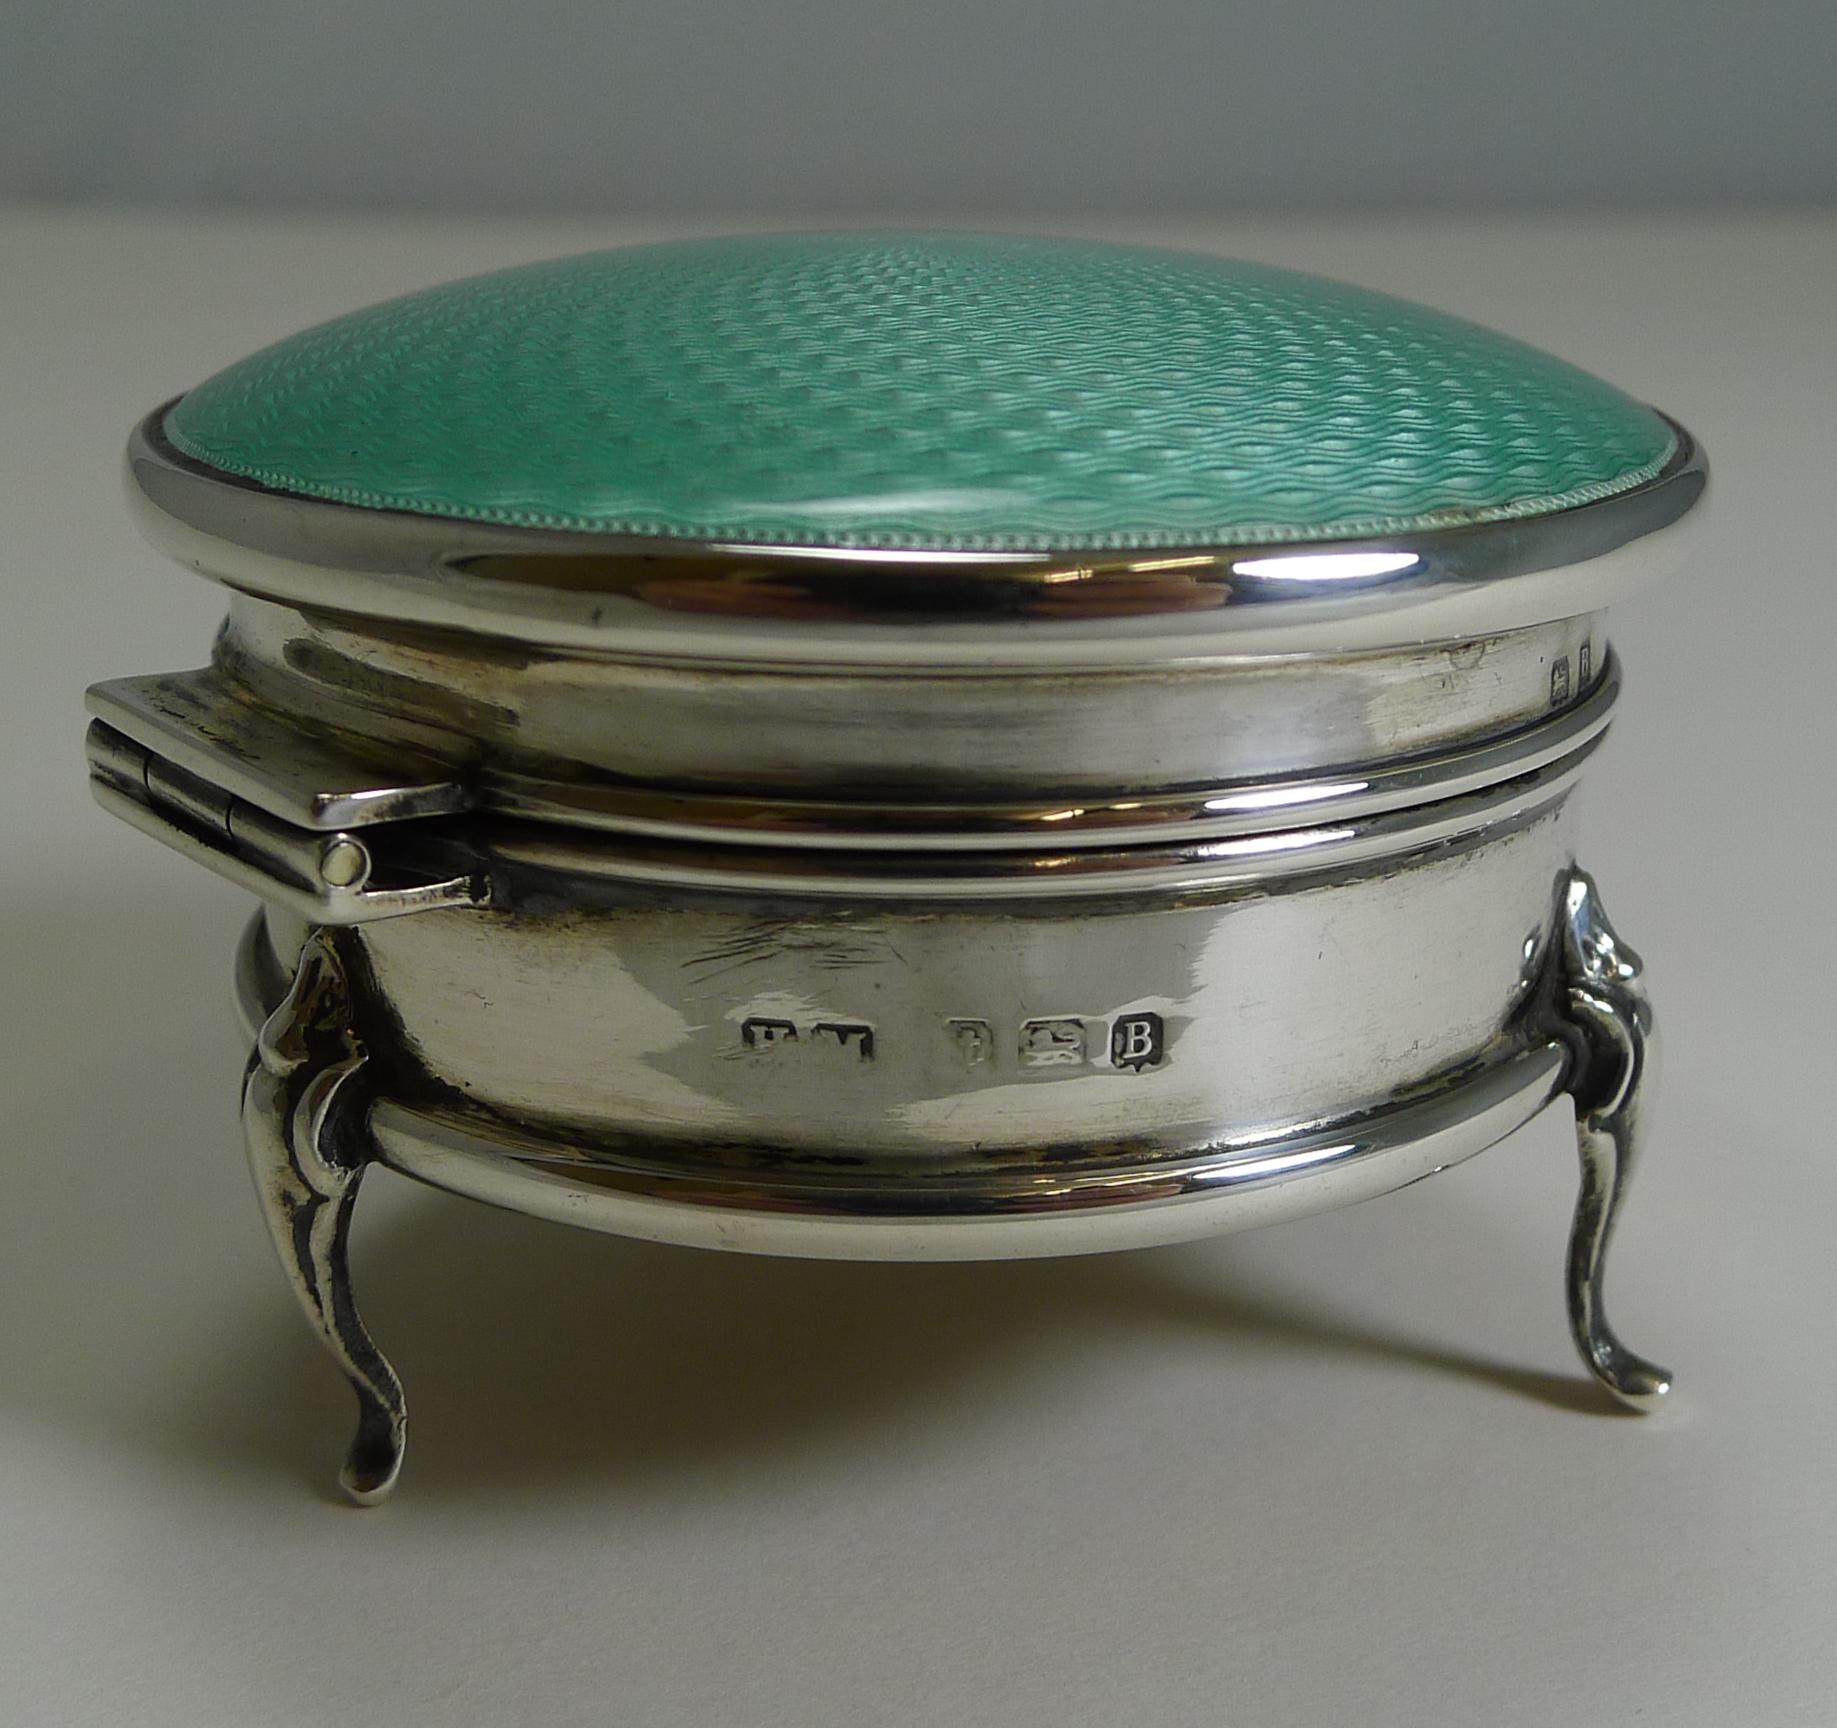 European English Sterling Silver and Guilloche Enamel Jewelry / Ring Box